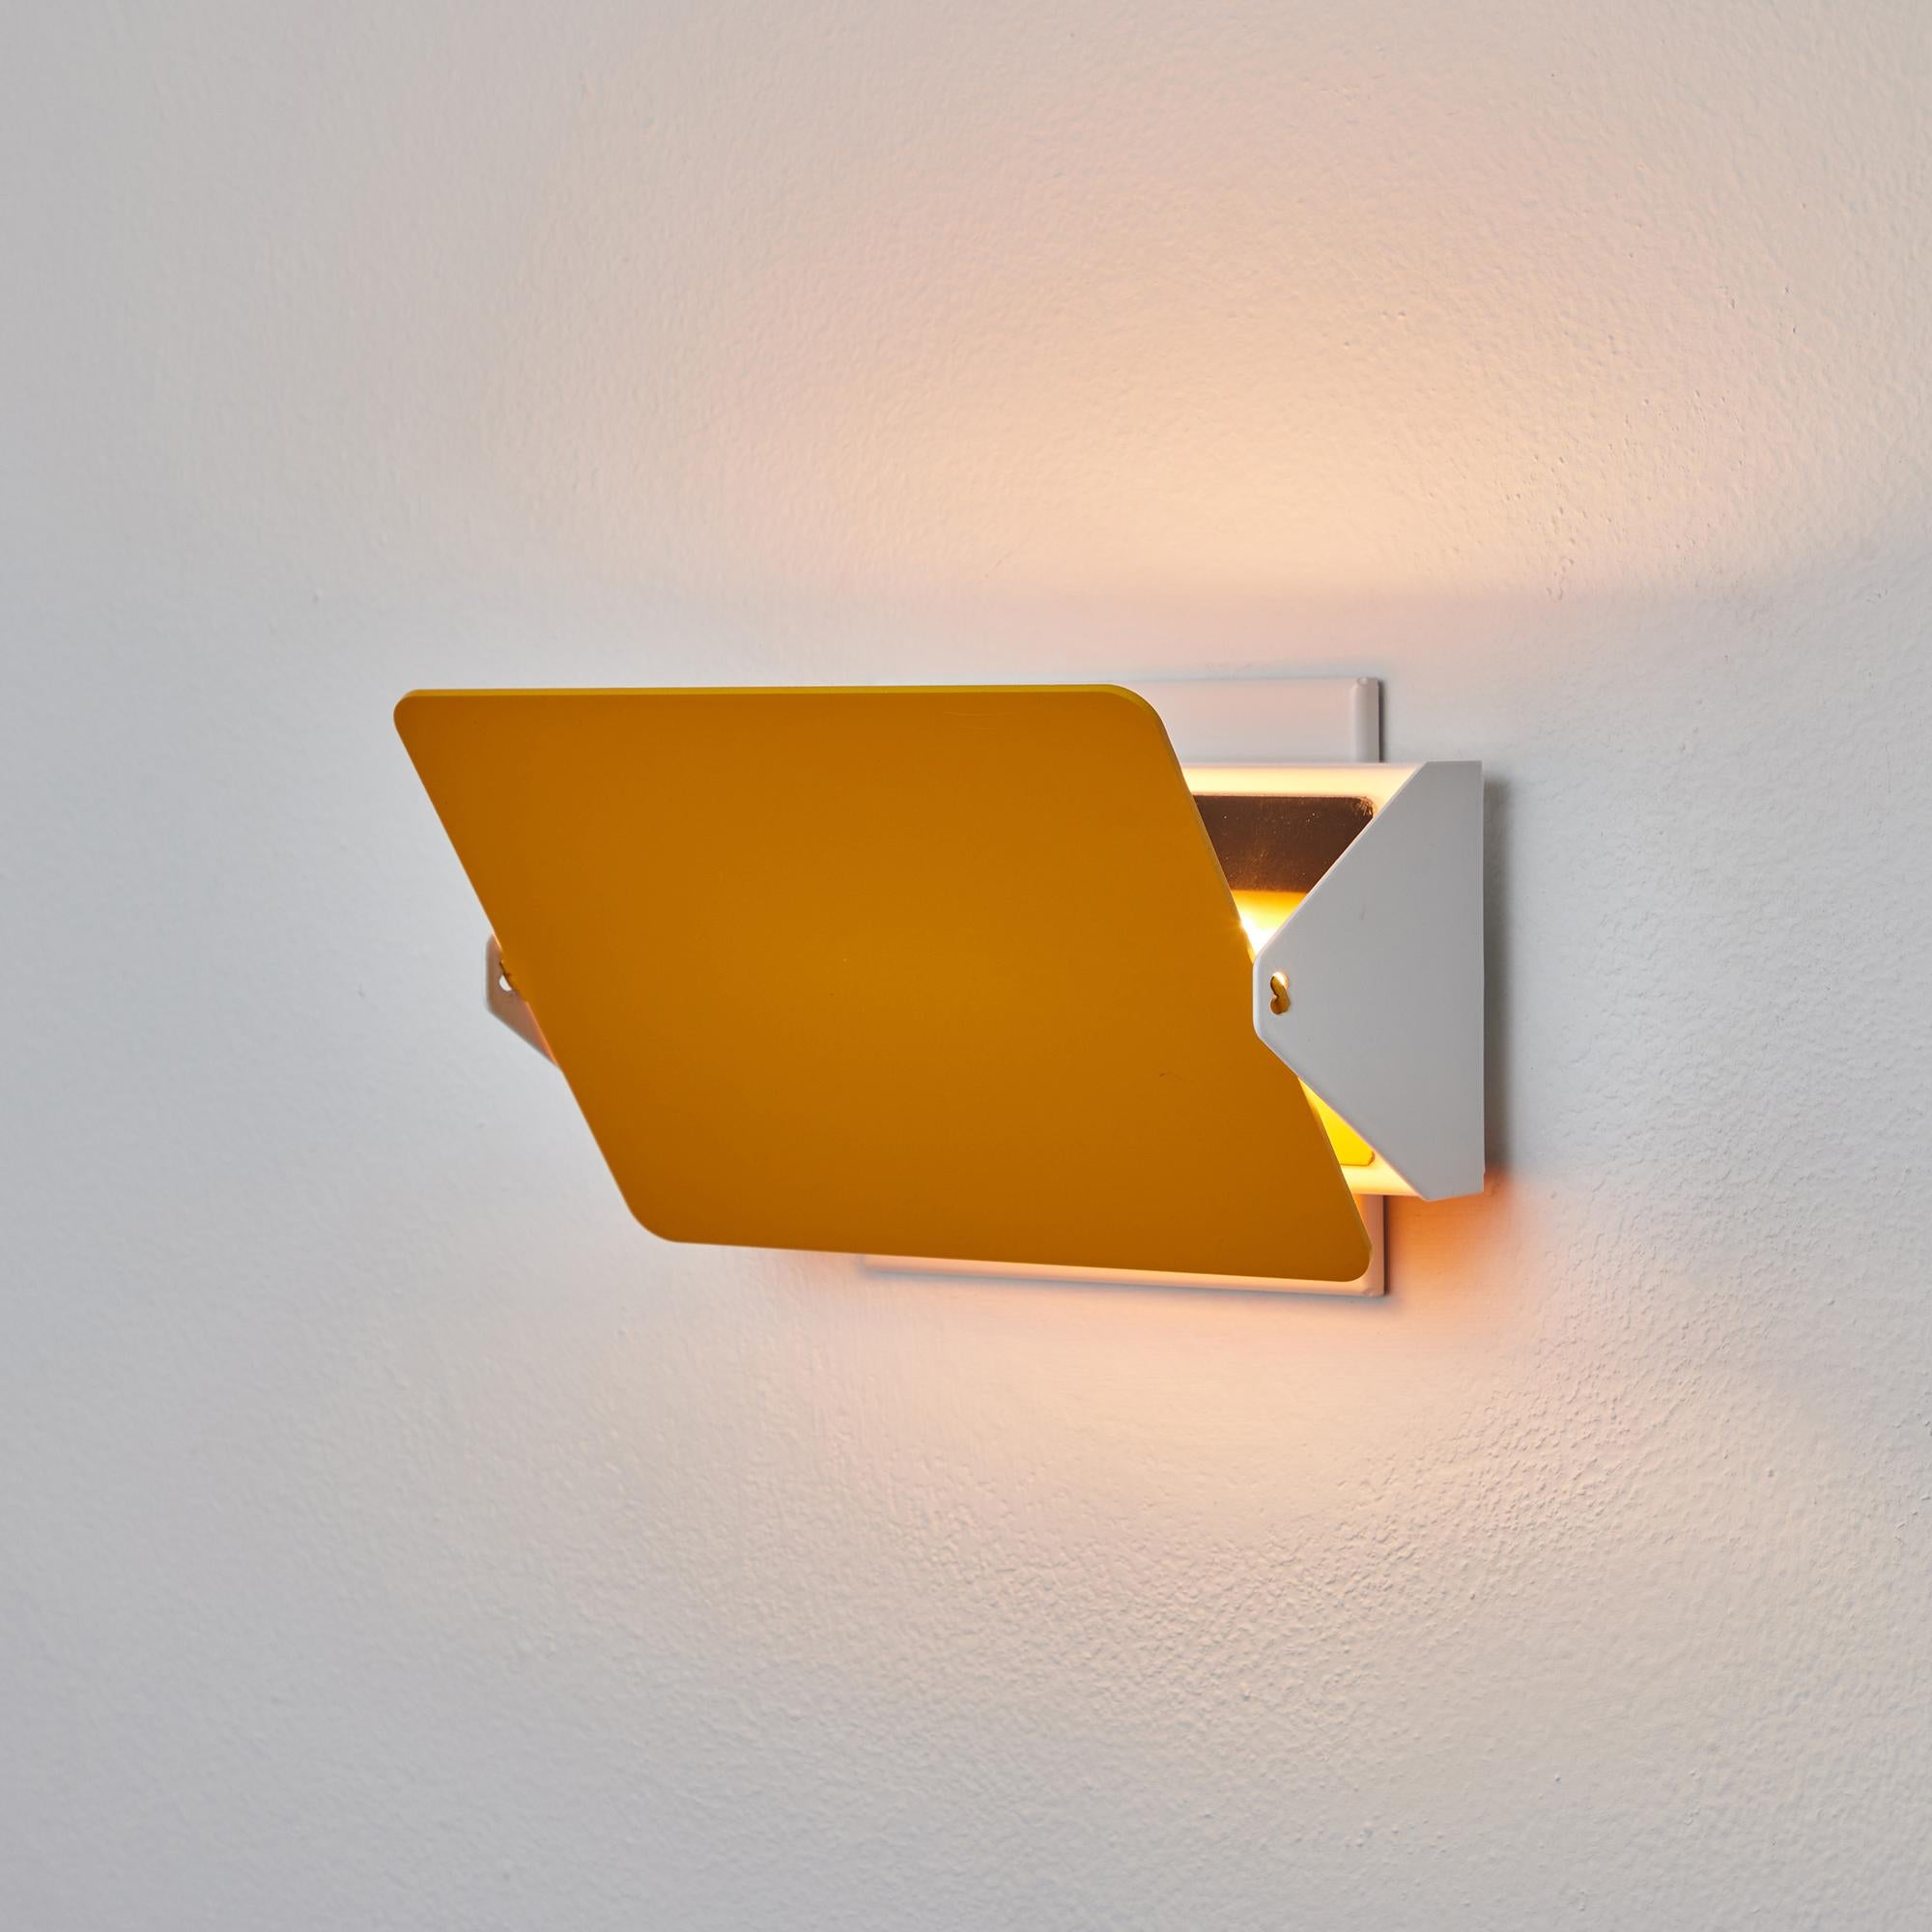 French Charlotte Perriand 'Applique à Volet Pivotant' Wall Light in Yellow for Nemo For Sale